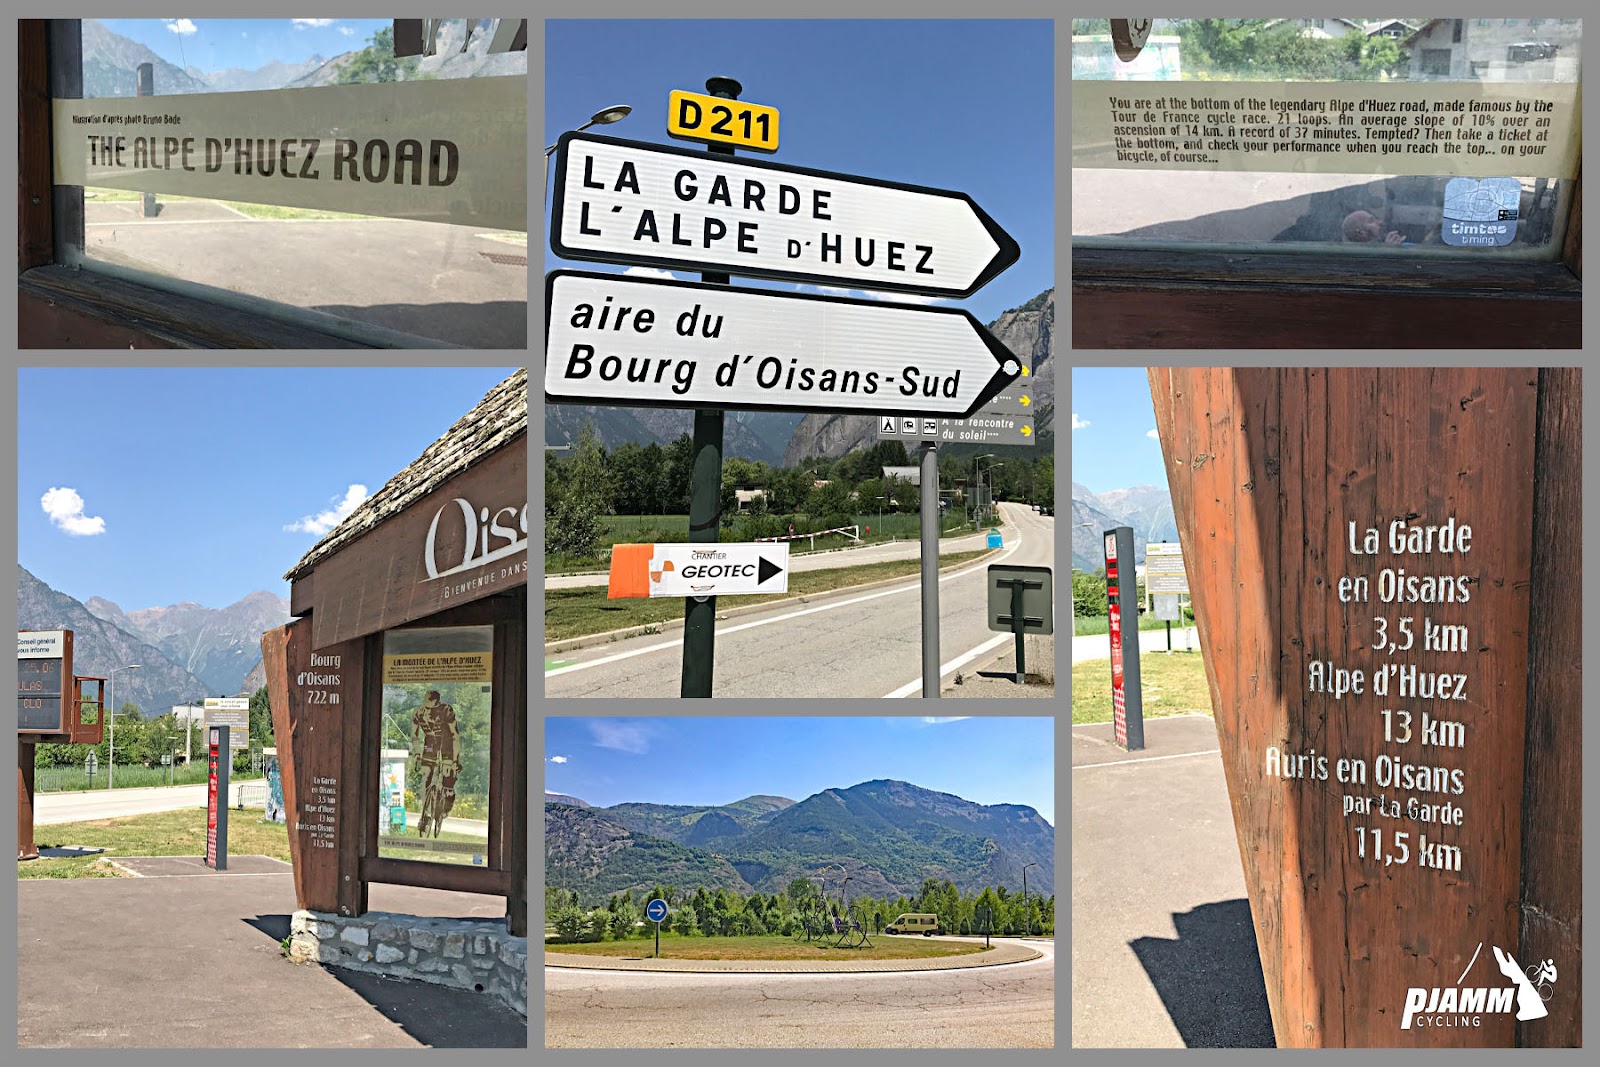 photo collage shows parking lot and Tour de France kiosk at climb's beginning